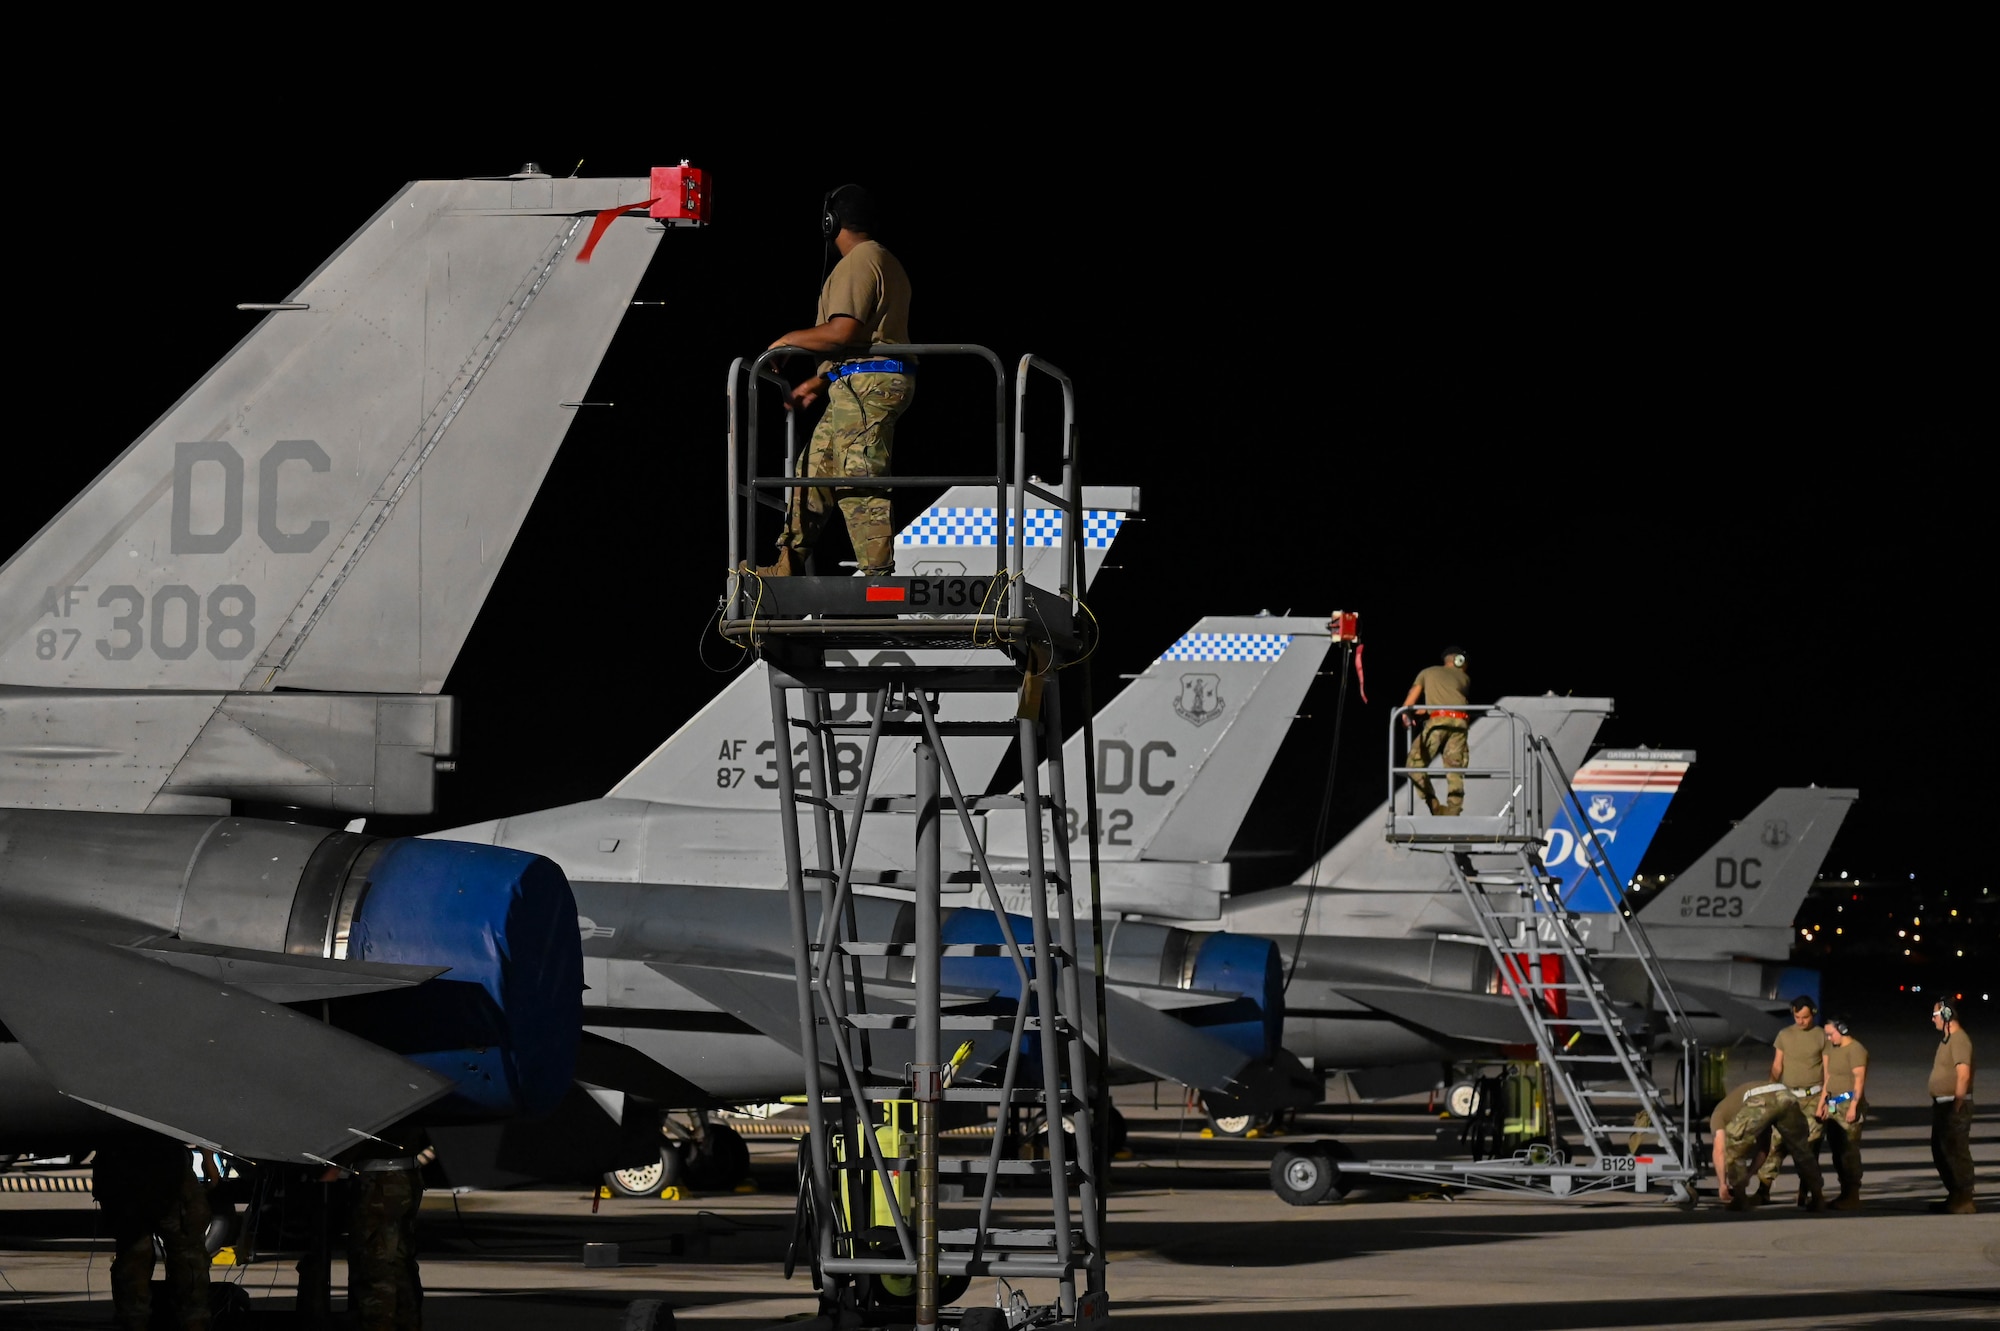 Airmen from the 87th Electronic Warfare Squadron assess the tail sensors of F-16 Fighting Falcons as part of COMBAT SHIELD during Red Flag 23-3 at Nellis Air Force Base, Nev., July 13, 2023. This Red Flag concentrated on three primary themes: defensive counter-air, offensive counter-air suppression of enemy air defenses, and offensive counter air-air interdiction. (U.S. Air Force photo by Capt. Benjamin Aronson)